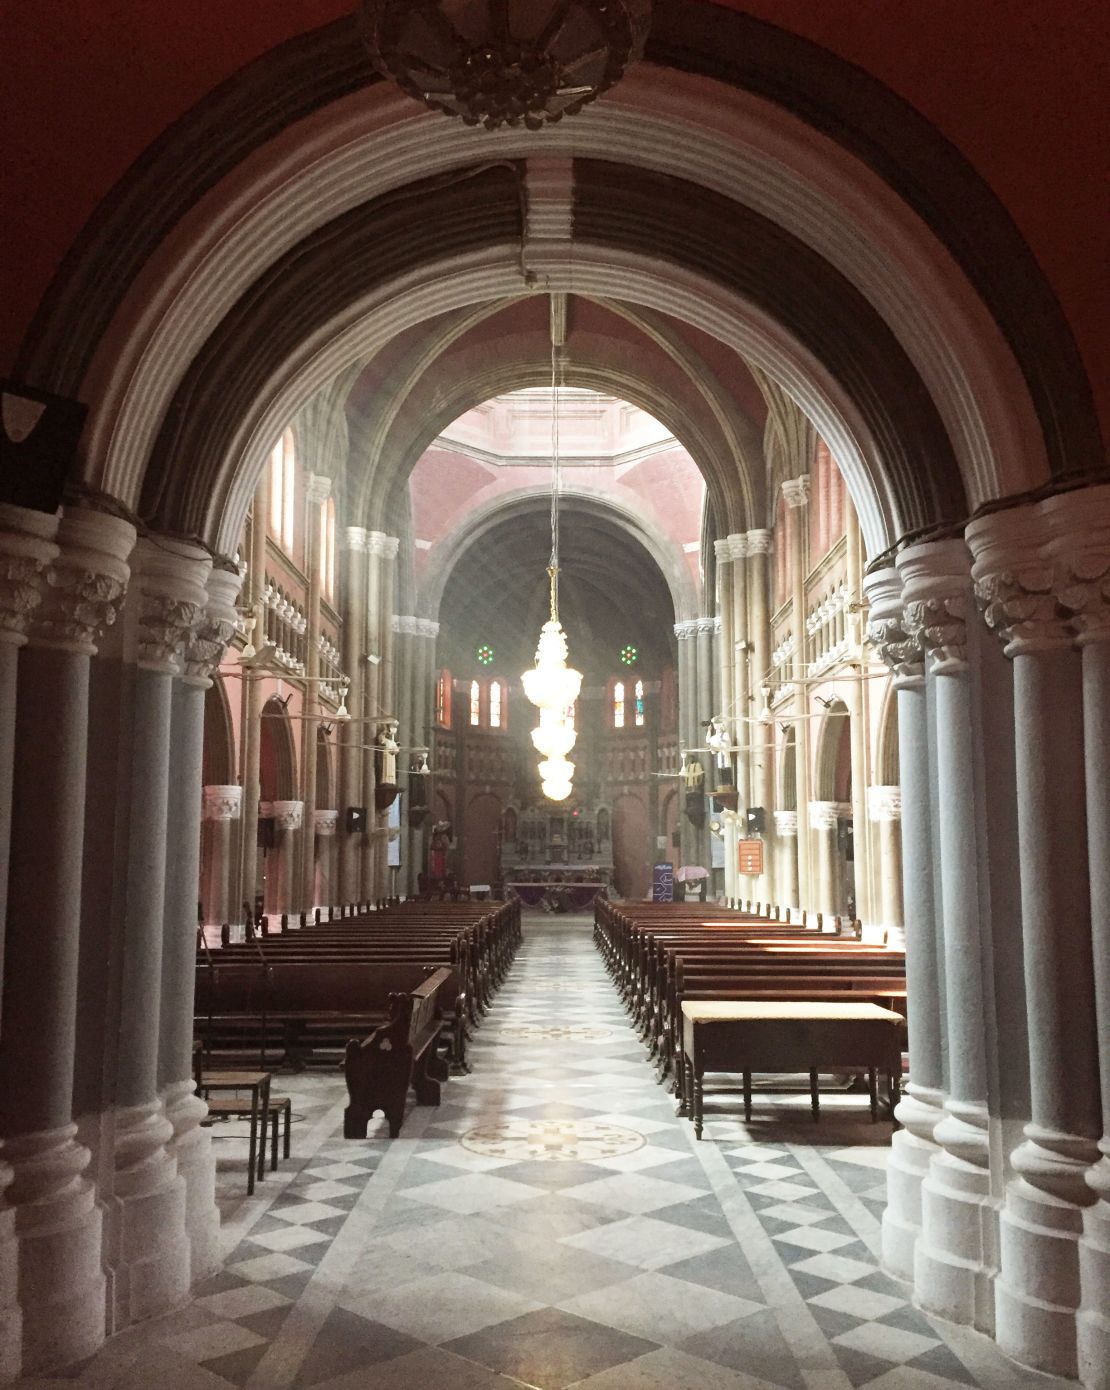 The Sacret Heart Cathedral is praised for its interior and is jammed with worshippers on Sundays.